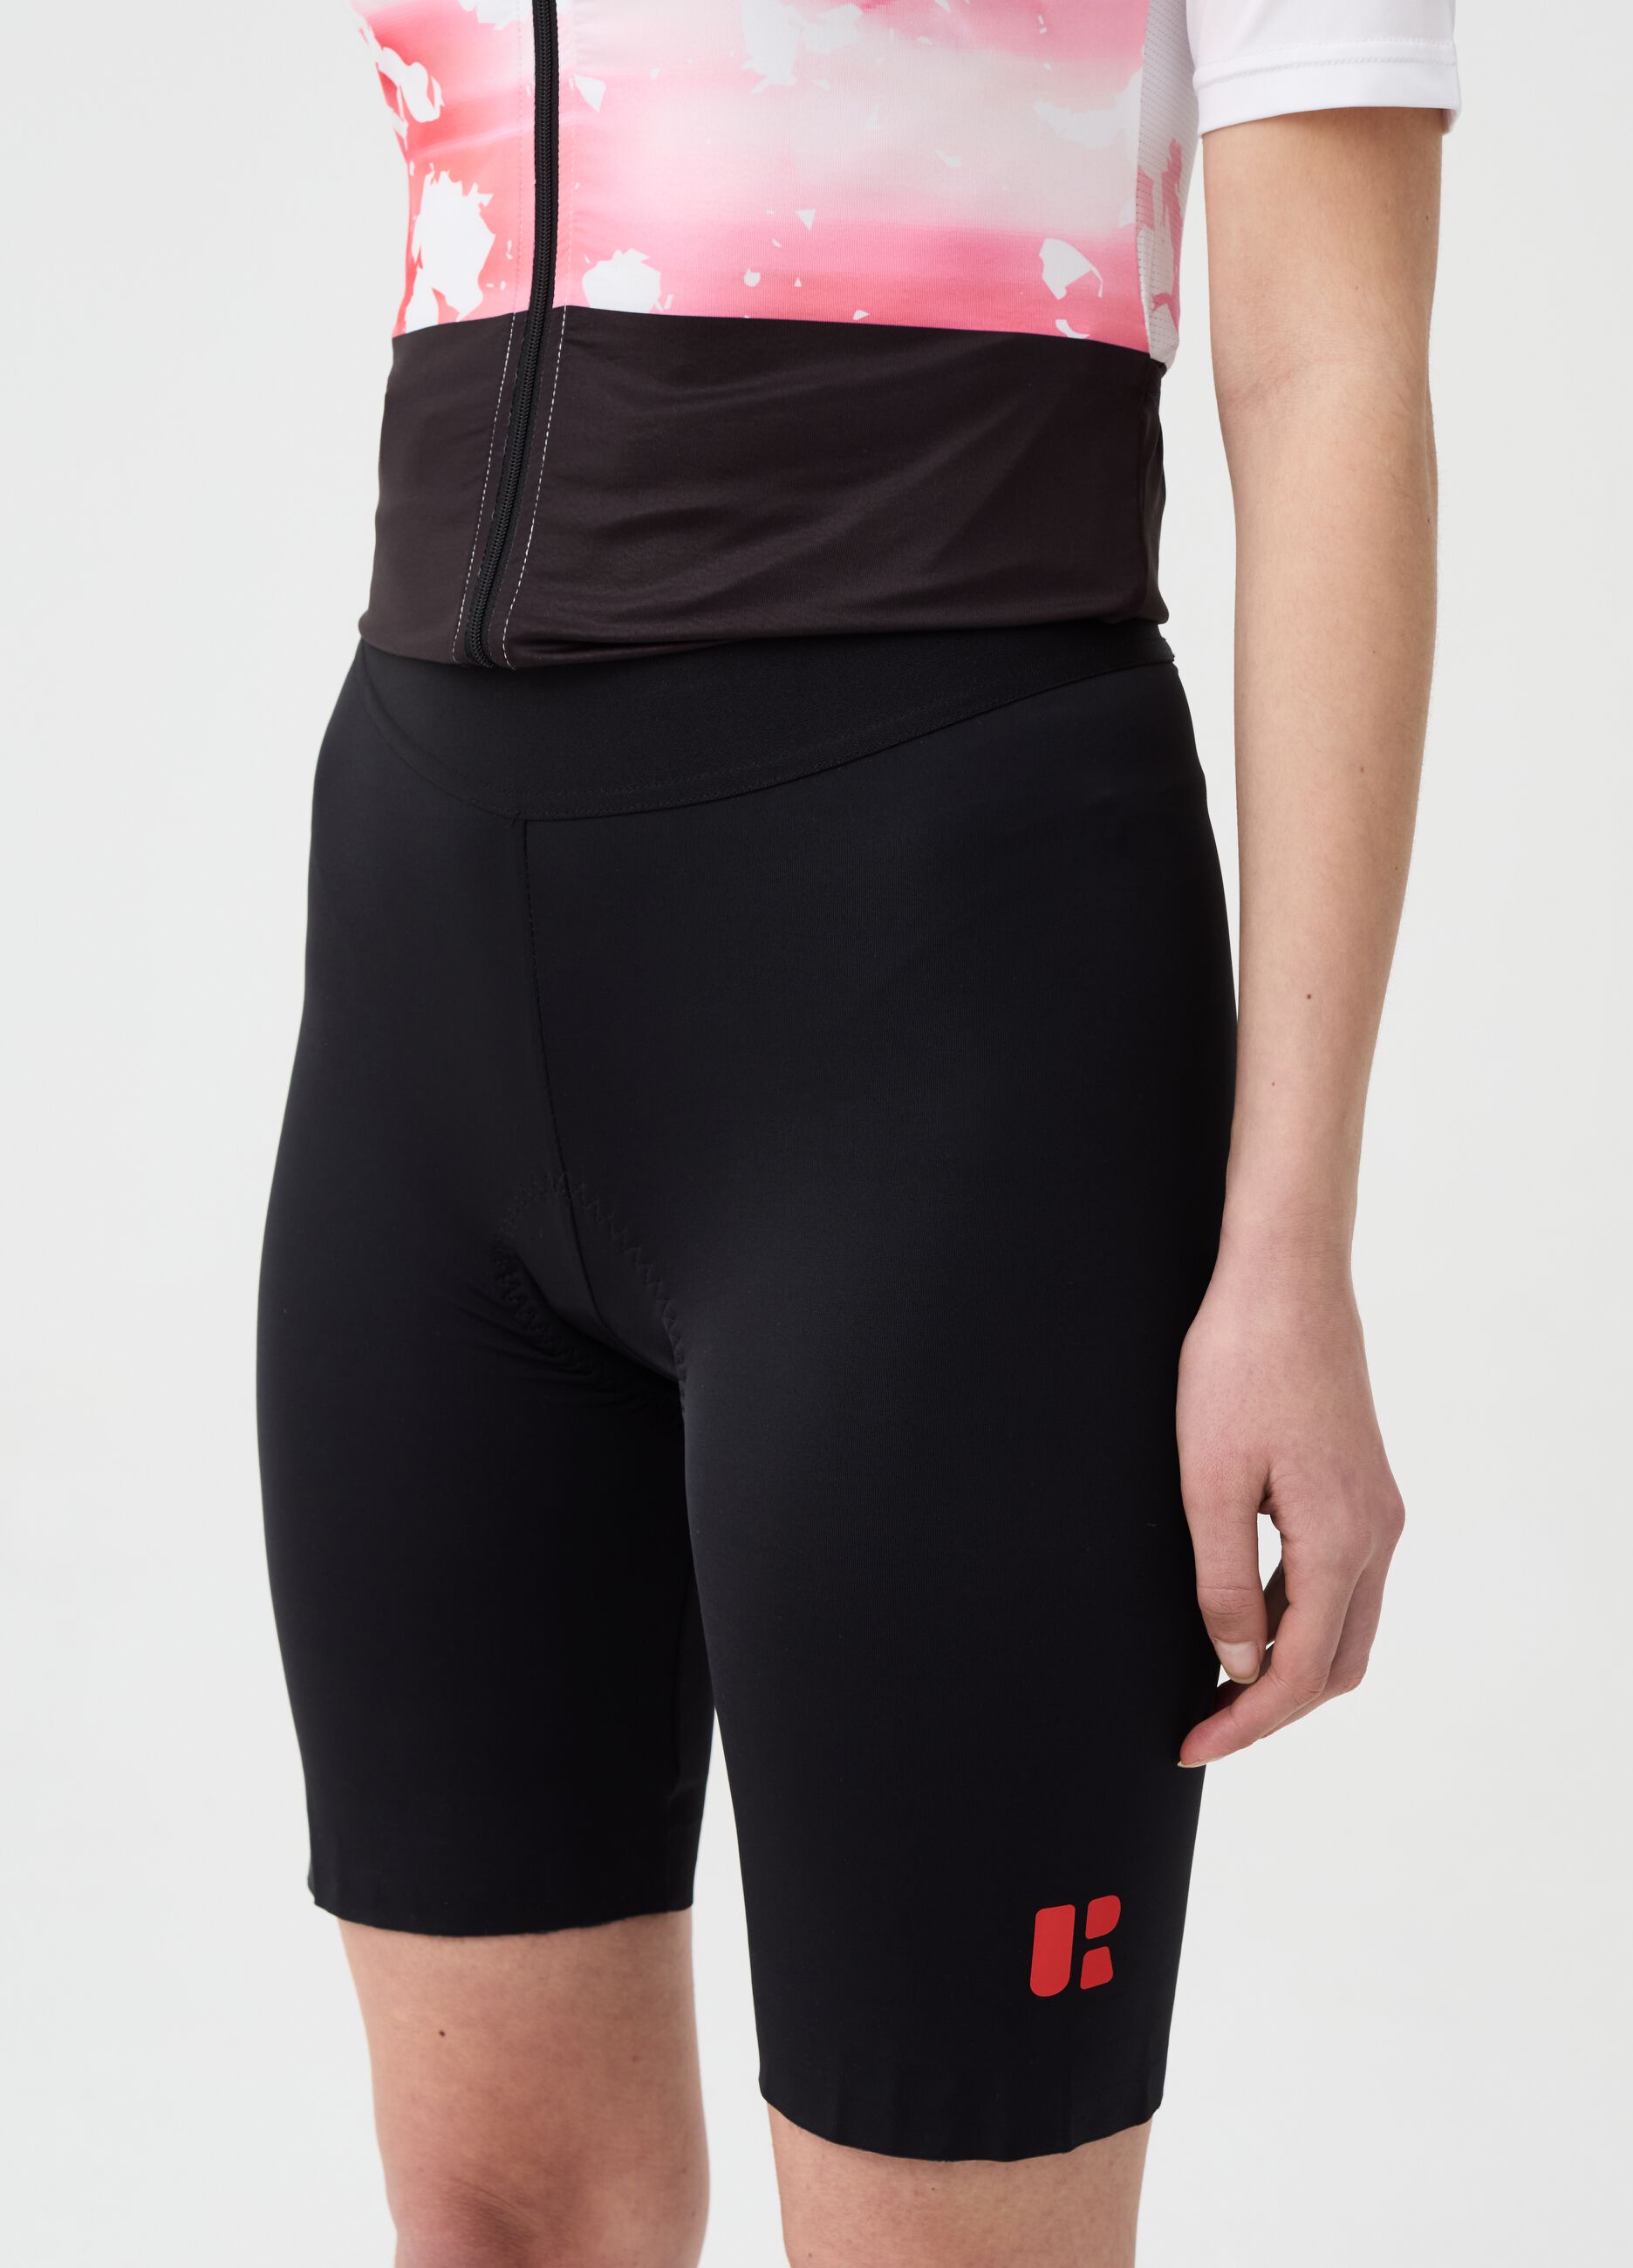 Urban Riders cycle leggings with pad